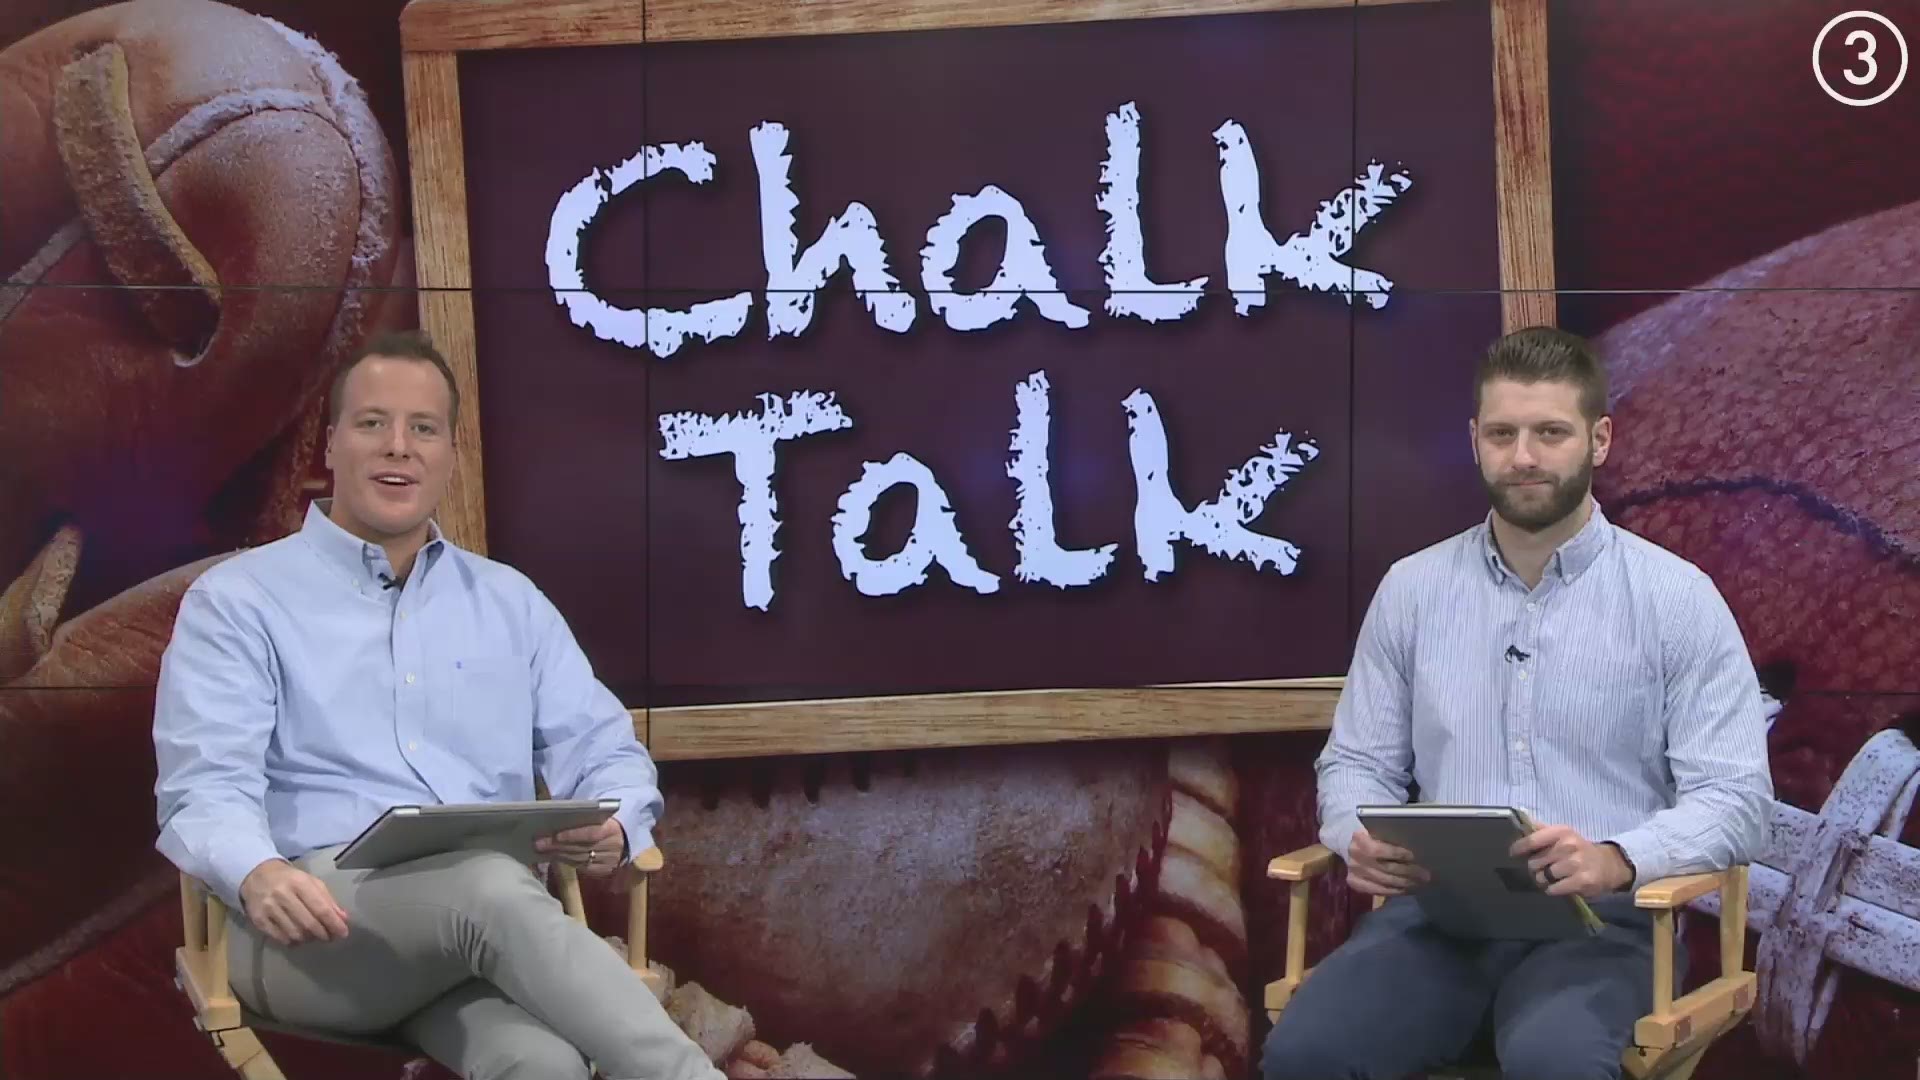 On the sixth episode of WKYC's Chalk Talk, Nick Camino and Ben Axelrod discuss and make their picks for Week 7 of the college football season and Week 6 of the NFL.